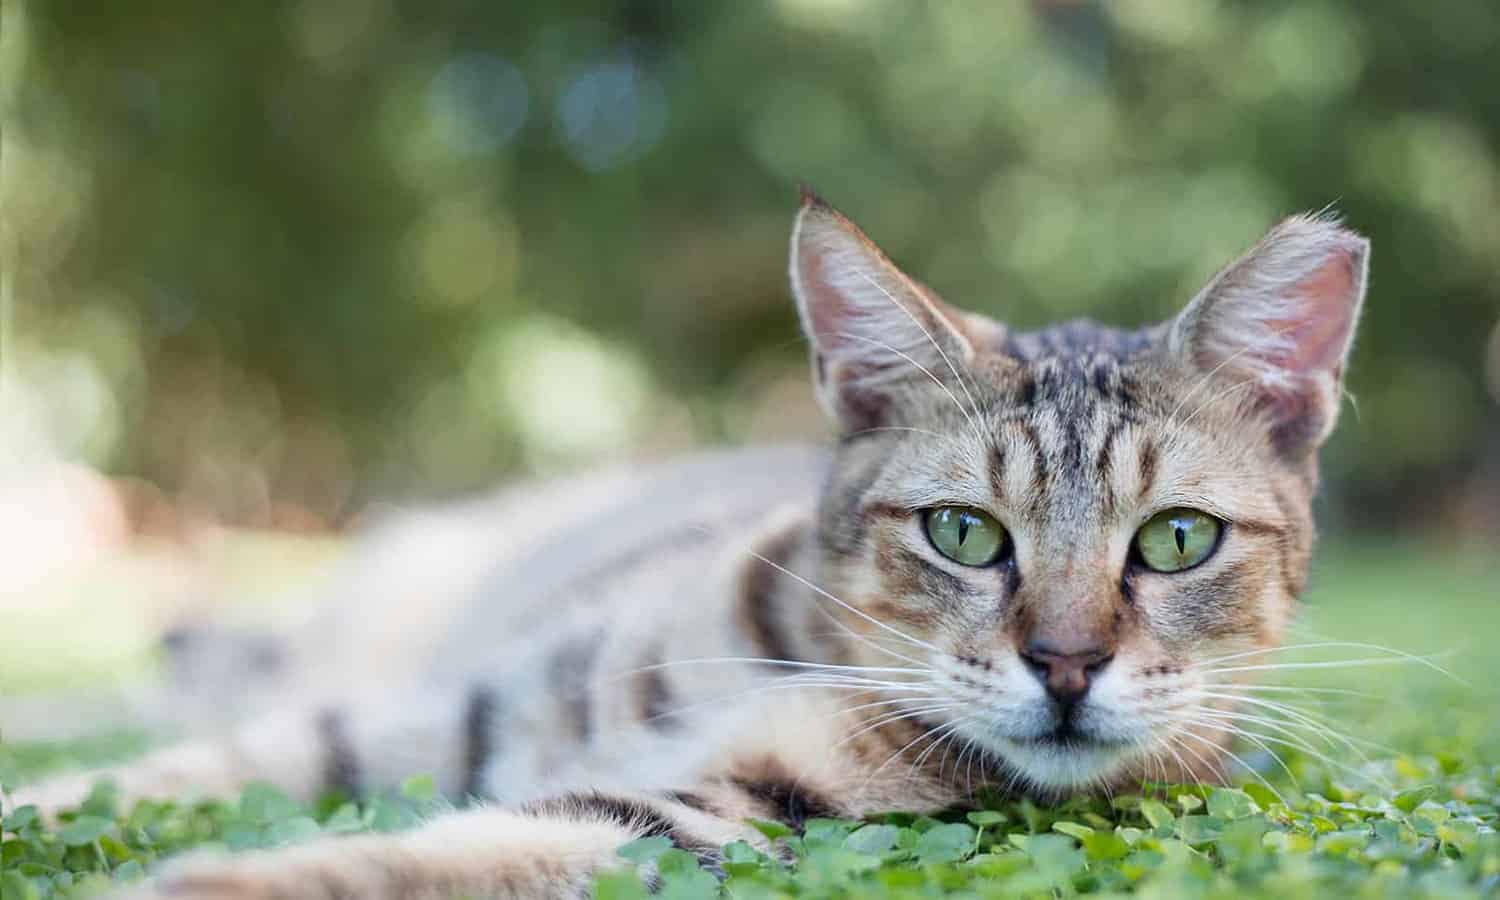 A cat laying on grass